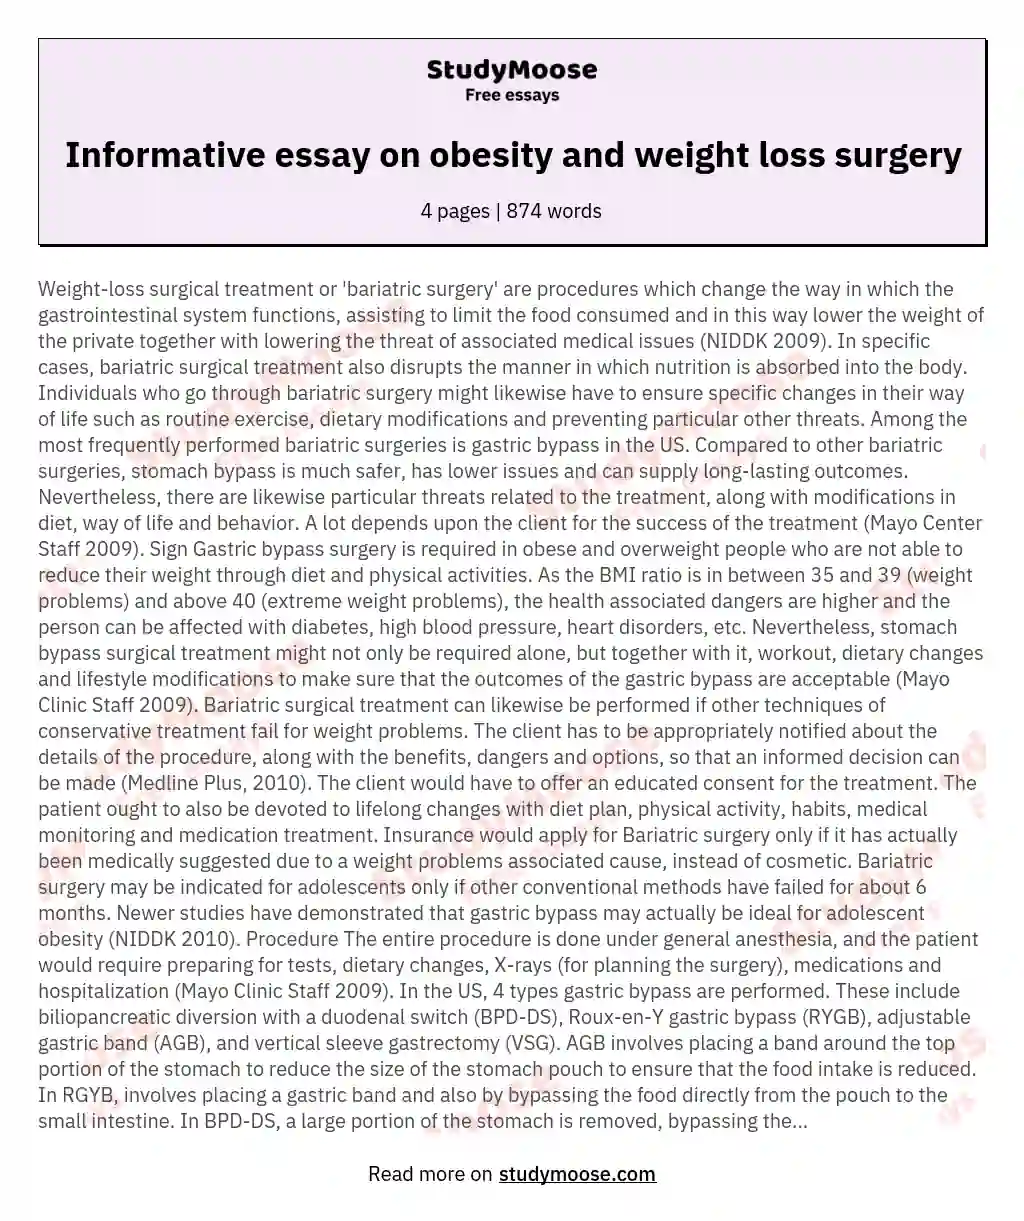 Informative essay on obesity and weight loss surgery